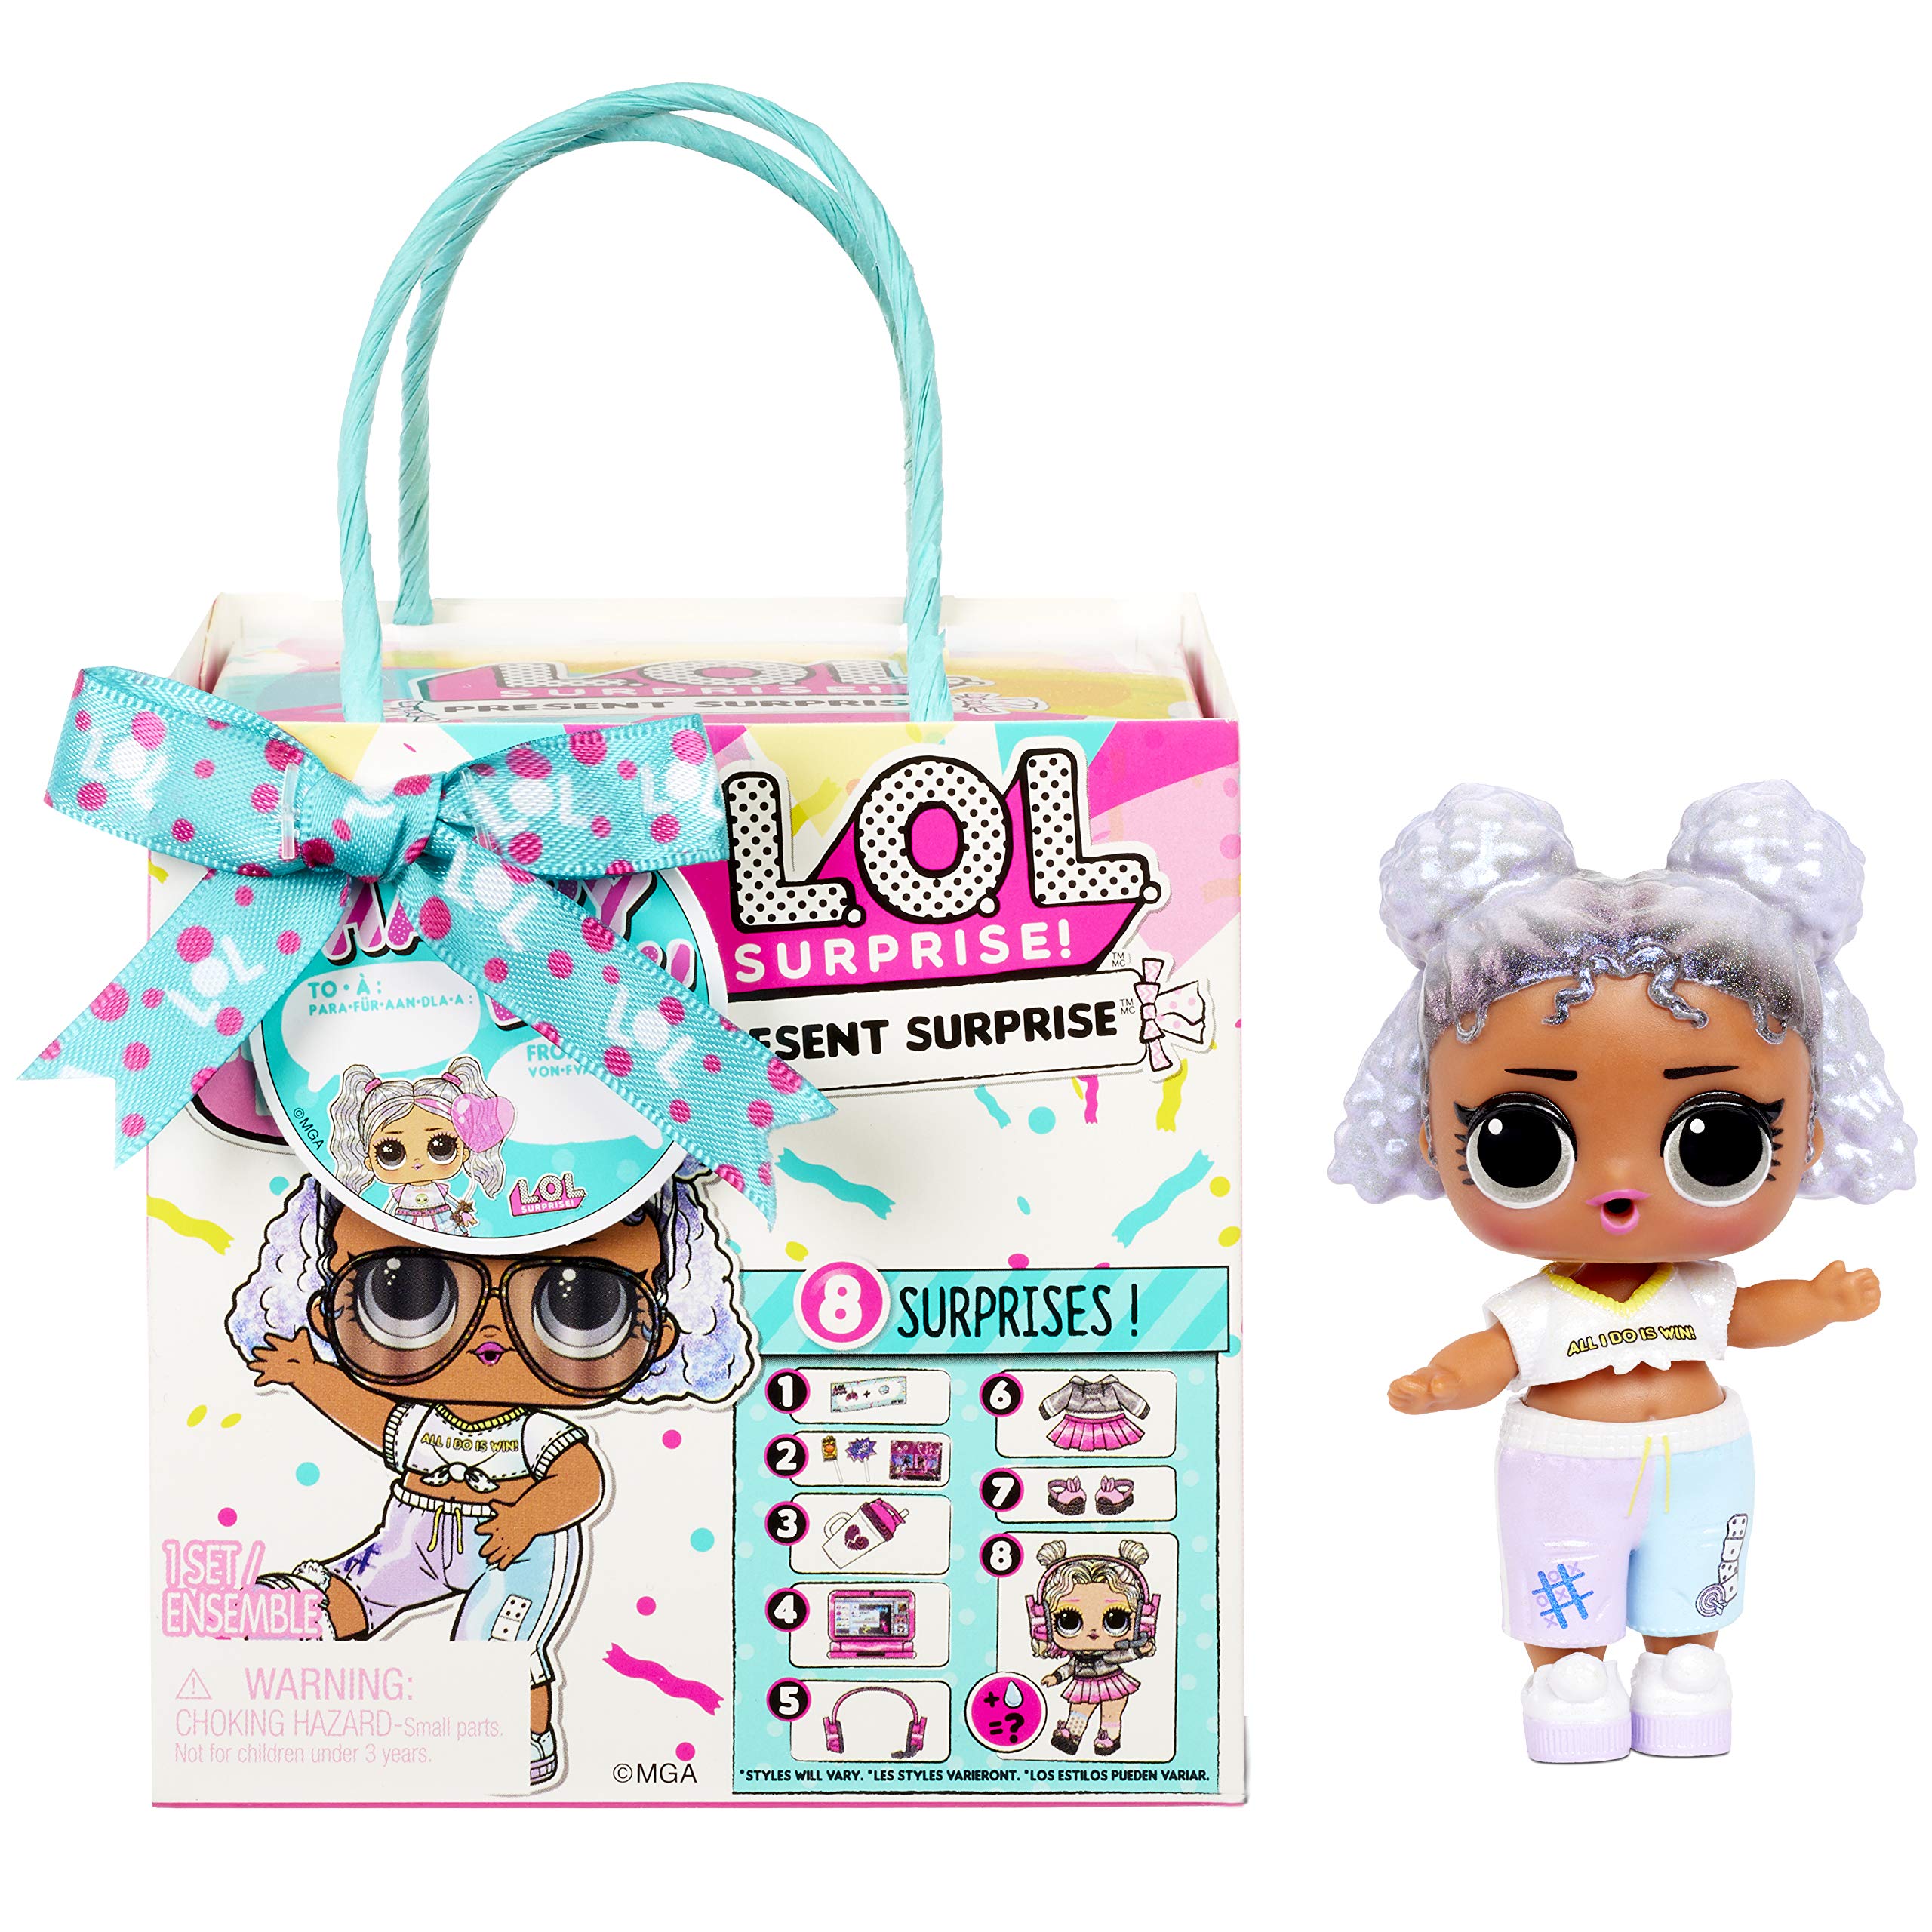 LOL Surprise Present Surprise Series 3 Birthday Month Theme, Great Gift for Kids Ages 4 5 6+ - image 1 of 6